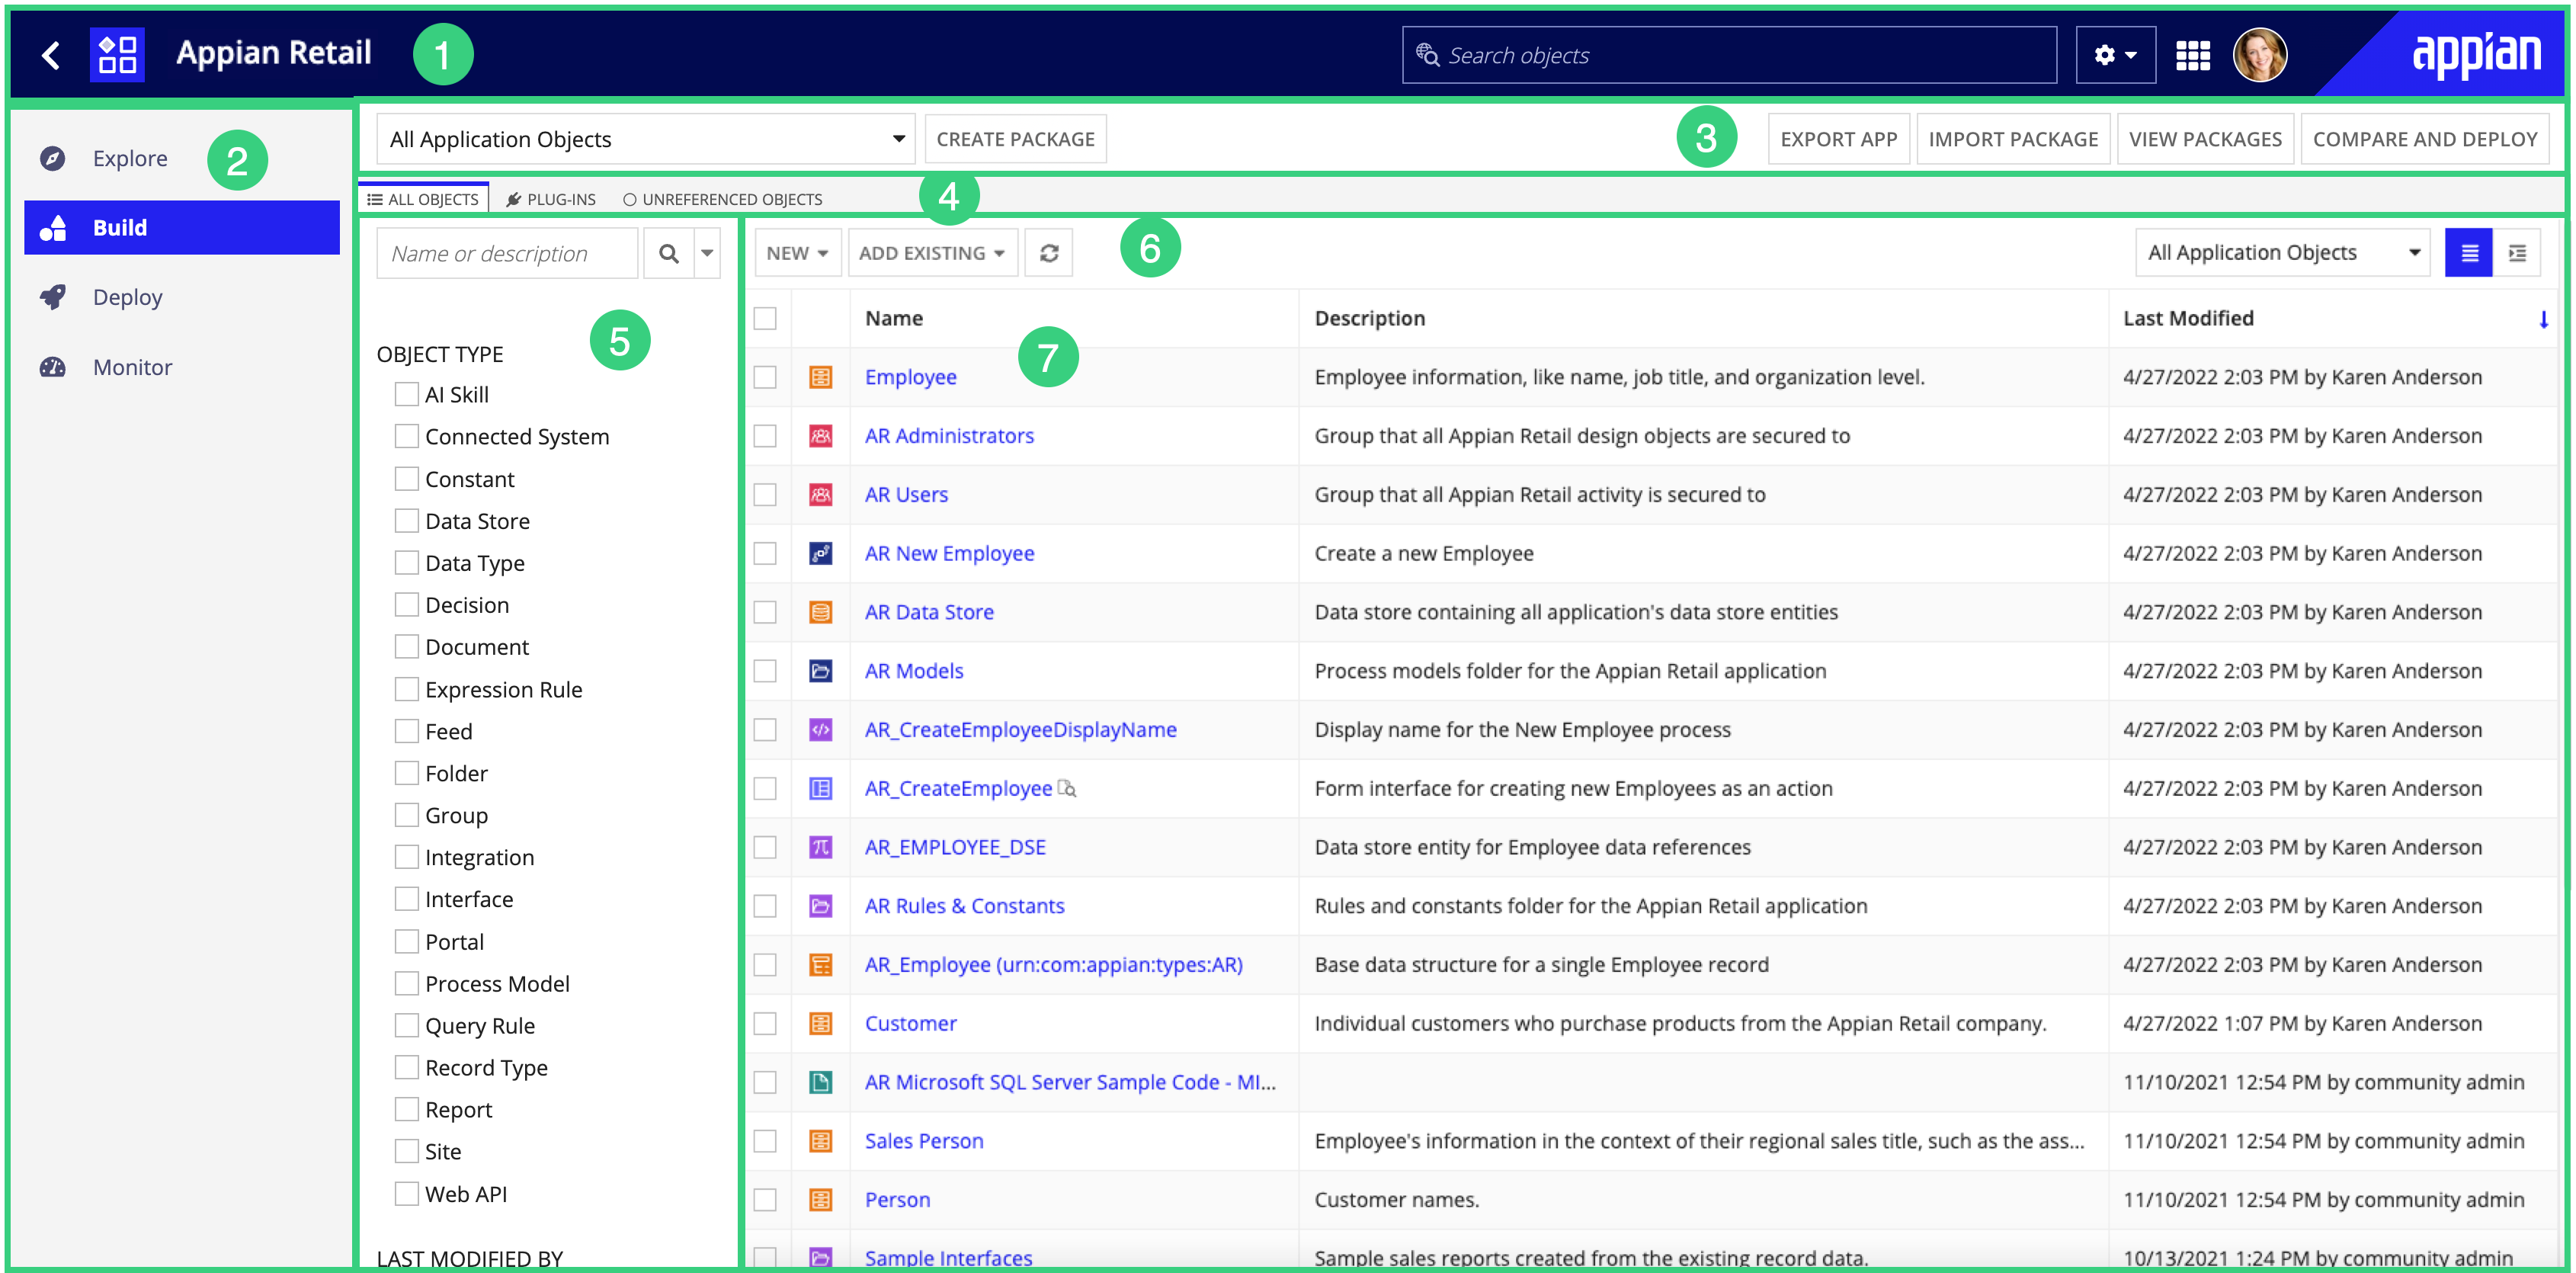 screenshot of the Objects view in Appian Designer